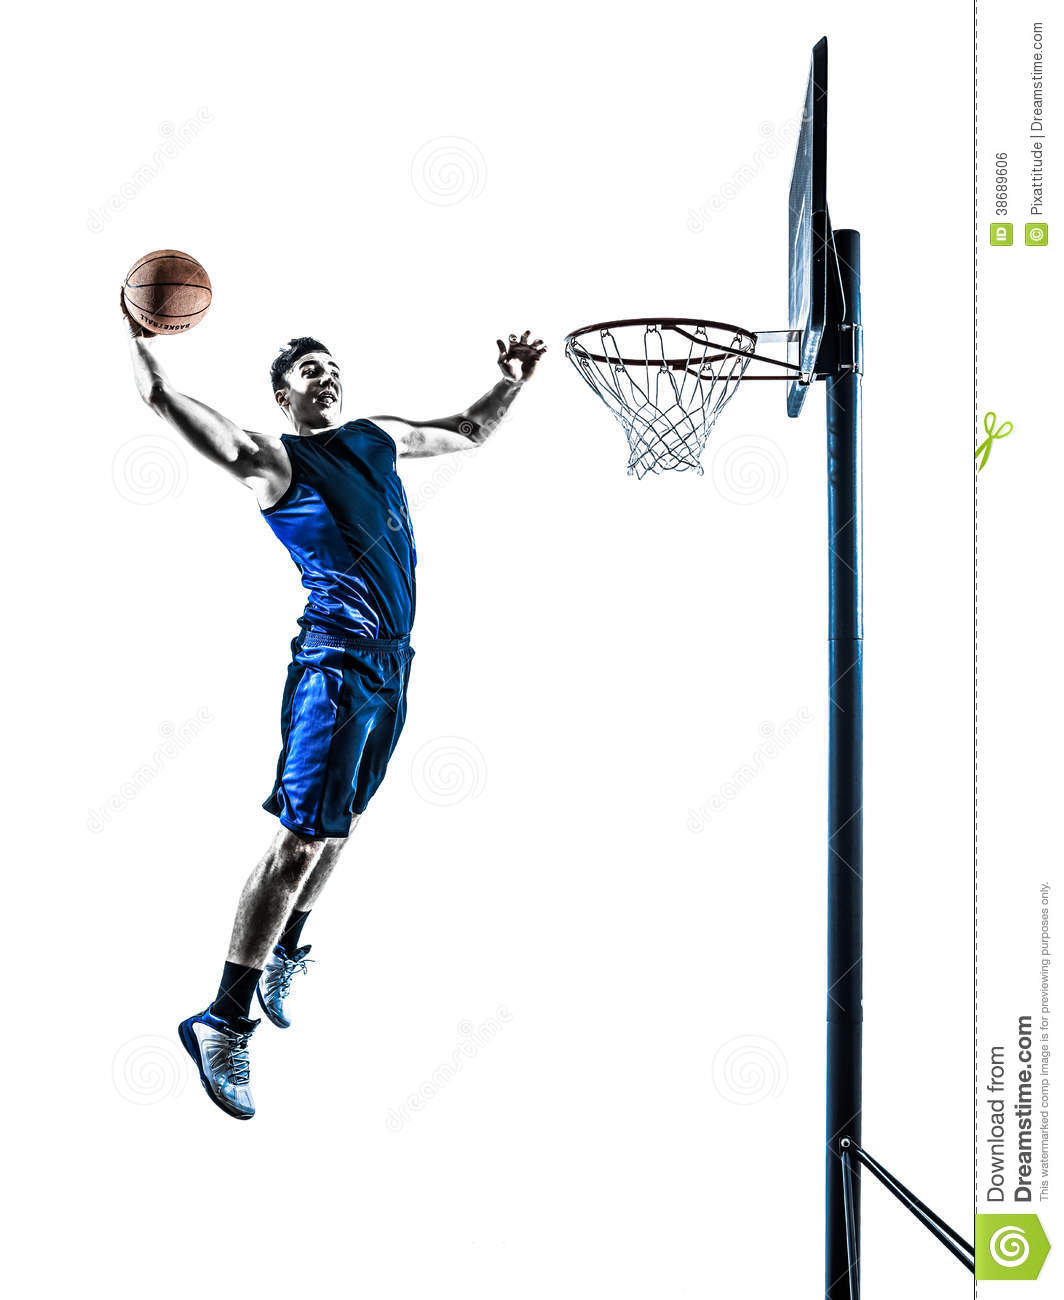 Basketball Player Jumping Dunking Silhouette Royalty Free Stock Image